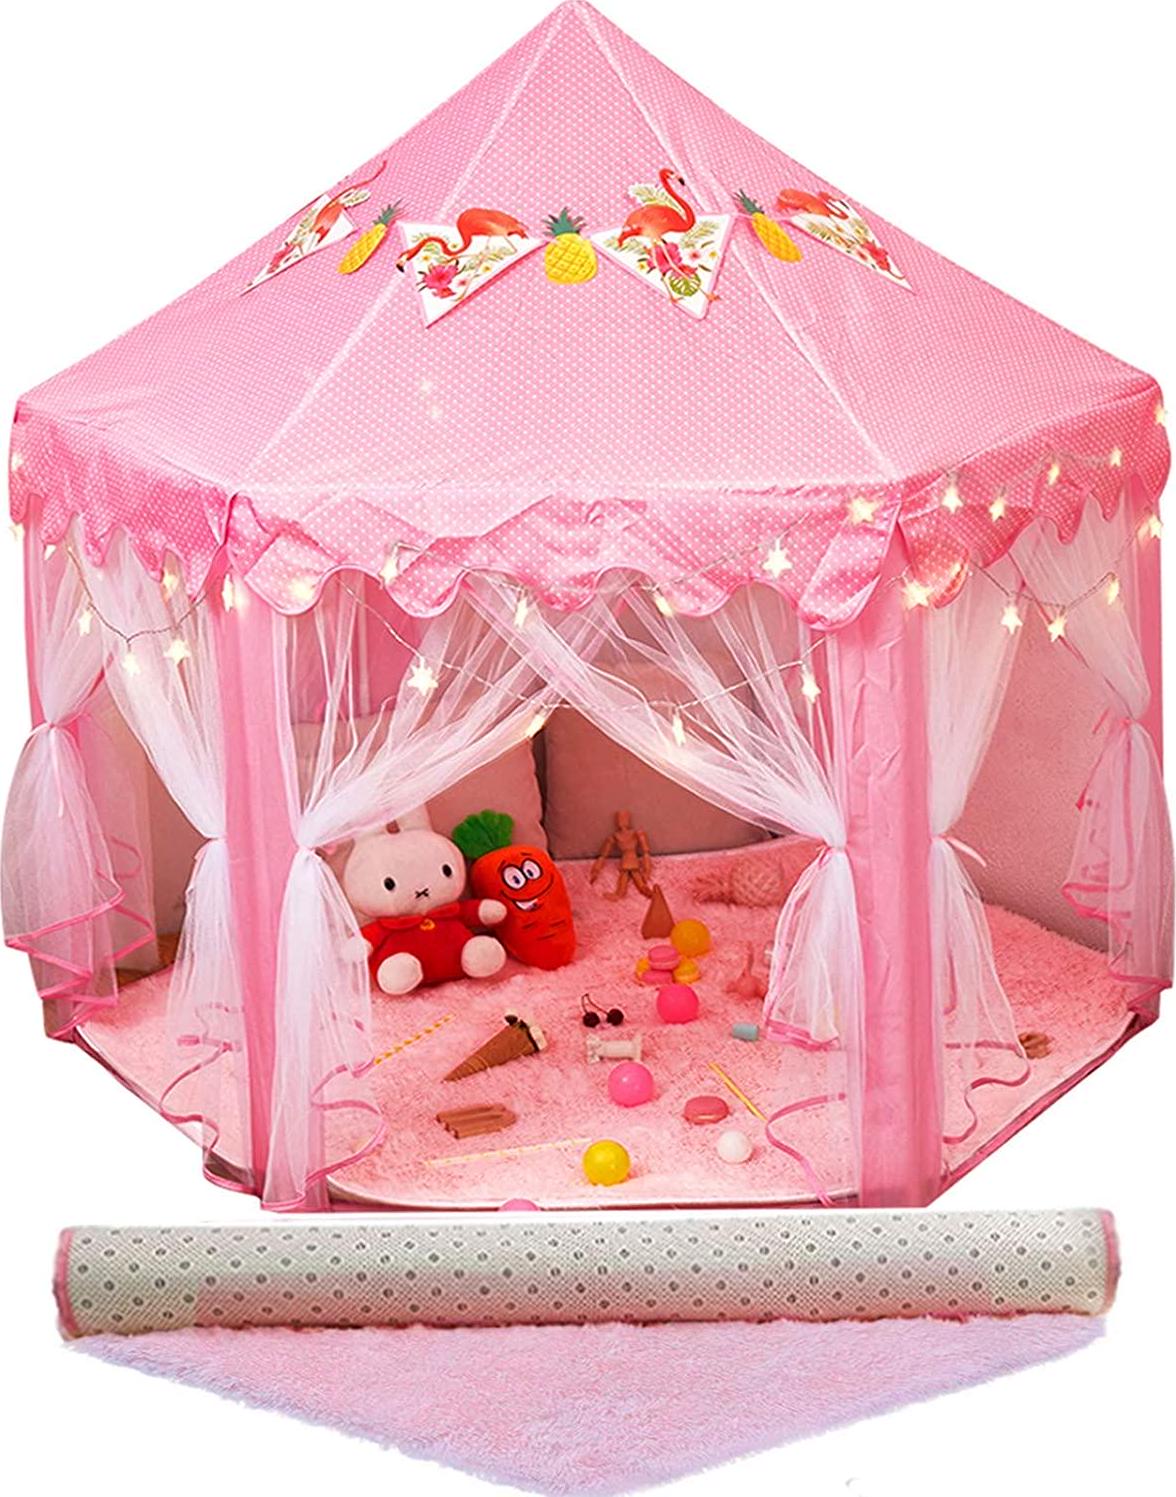 Twinkle Star, Twinkle Star 55 x 53 Princess Play Castle Tent for Girls Playhouse with 50 LEDs Star String Lights, Ultra Soft Rug and Banners Decor, Princess Tent, Kids Game House for Indoor Outdoor Game, Pink